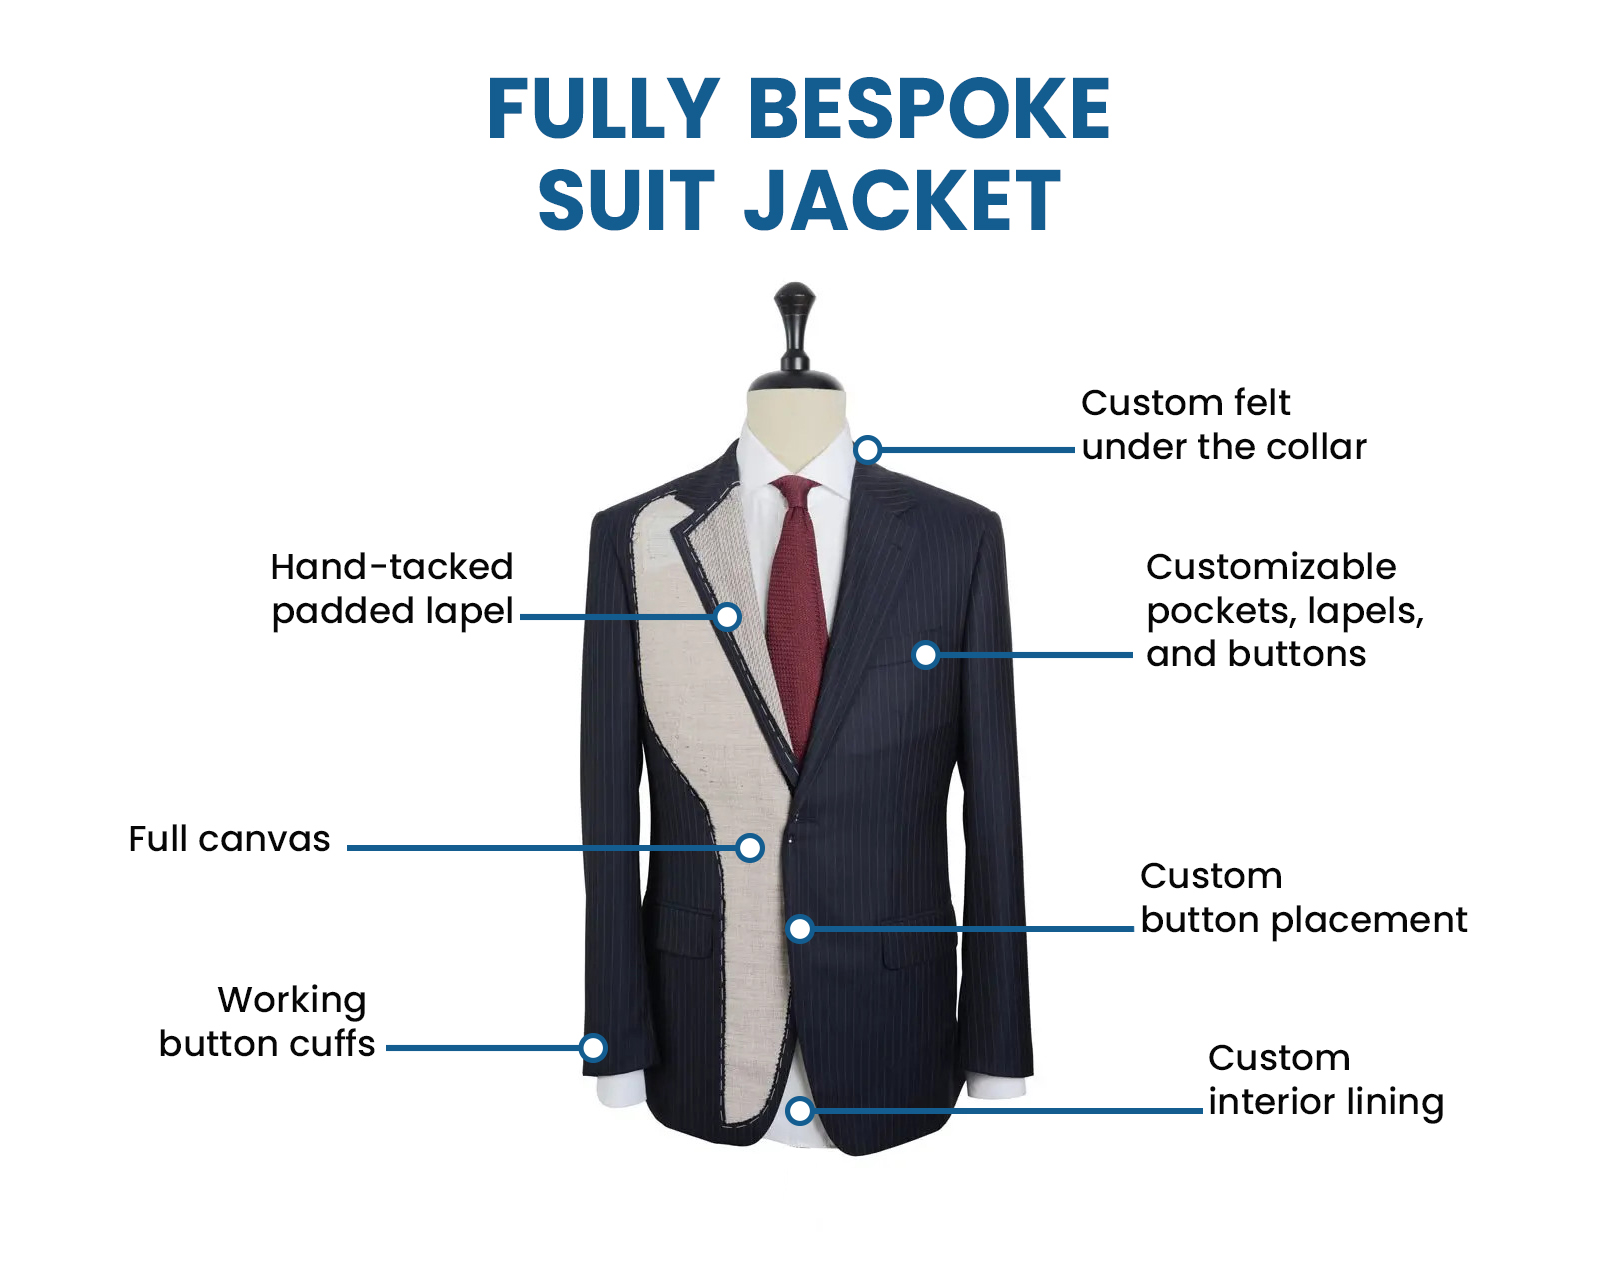 what is a fully bespoke suit jacket